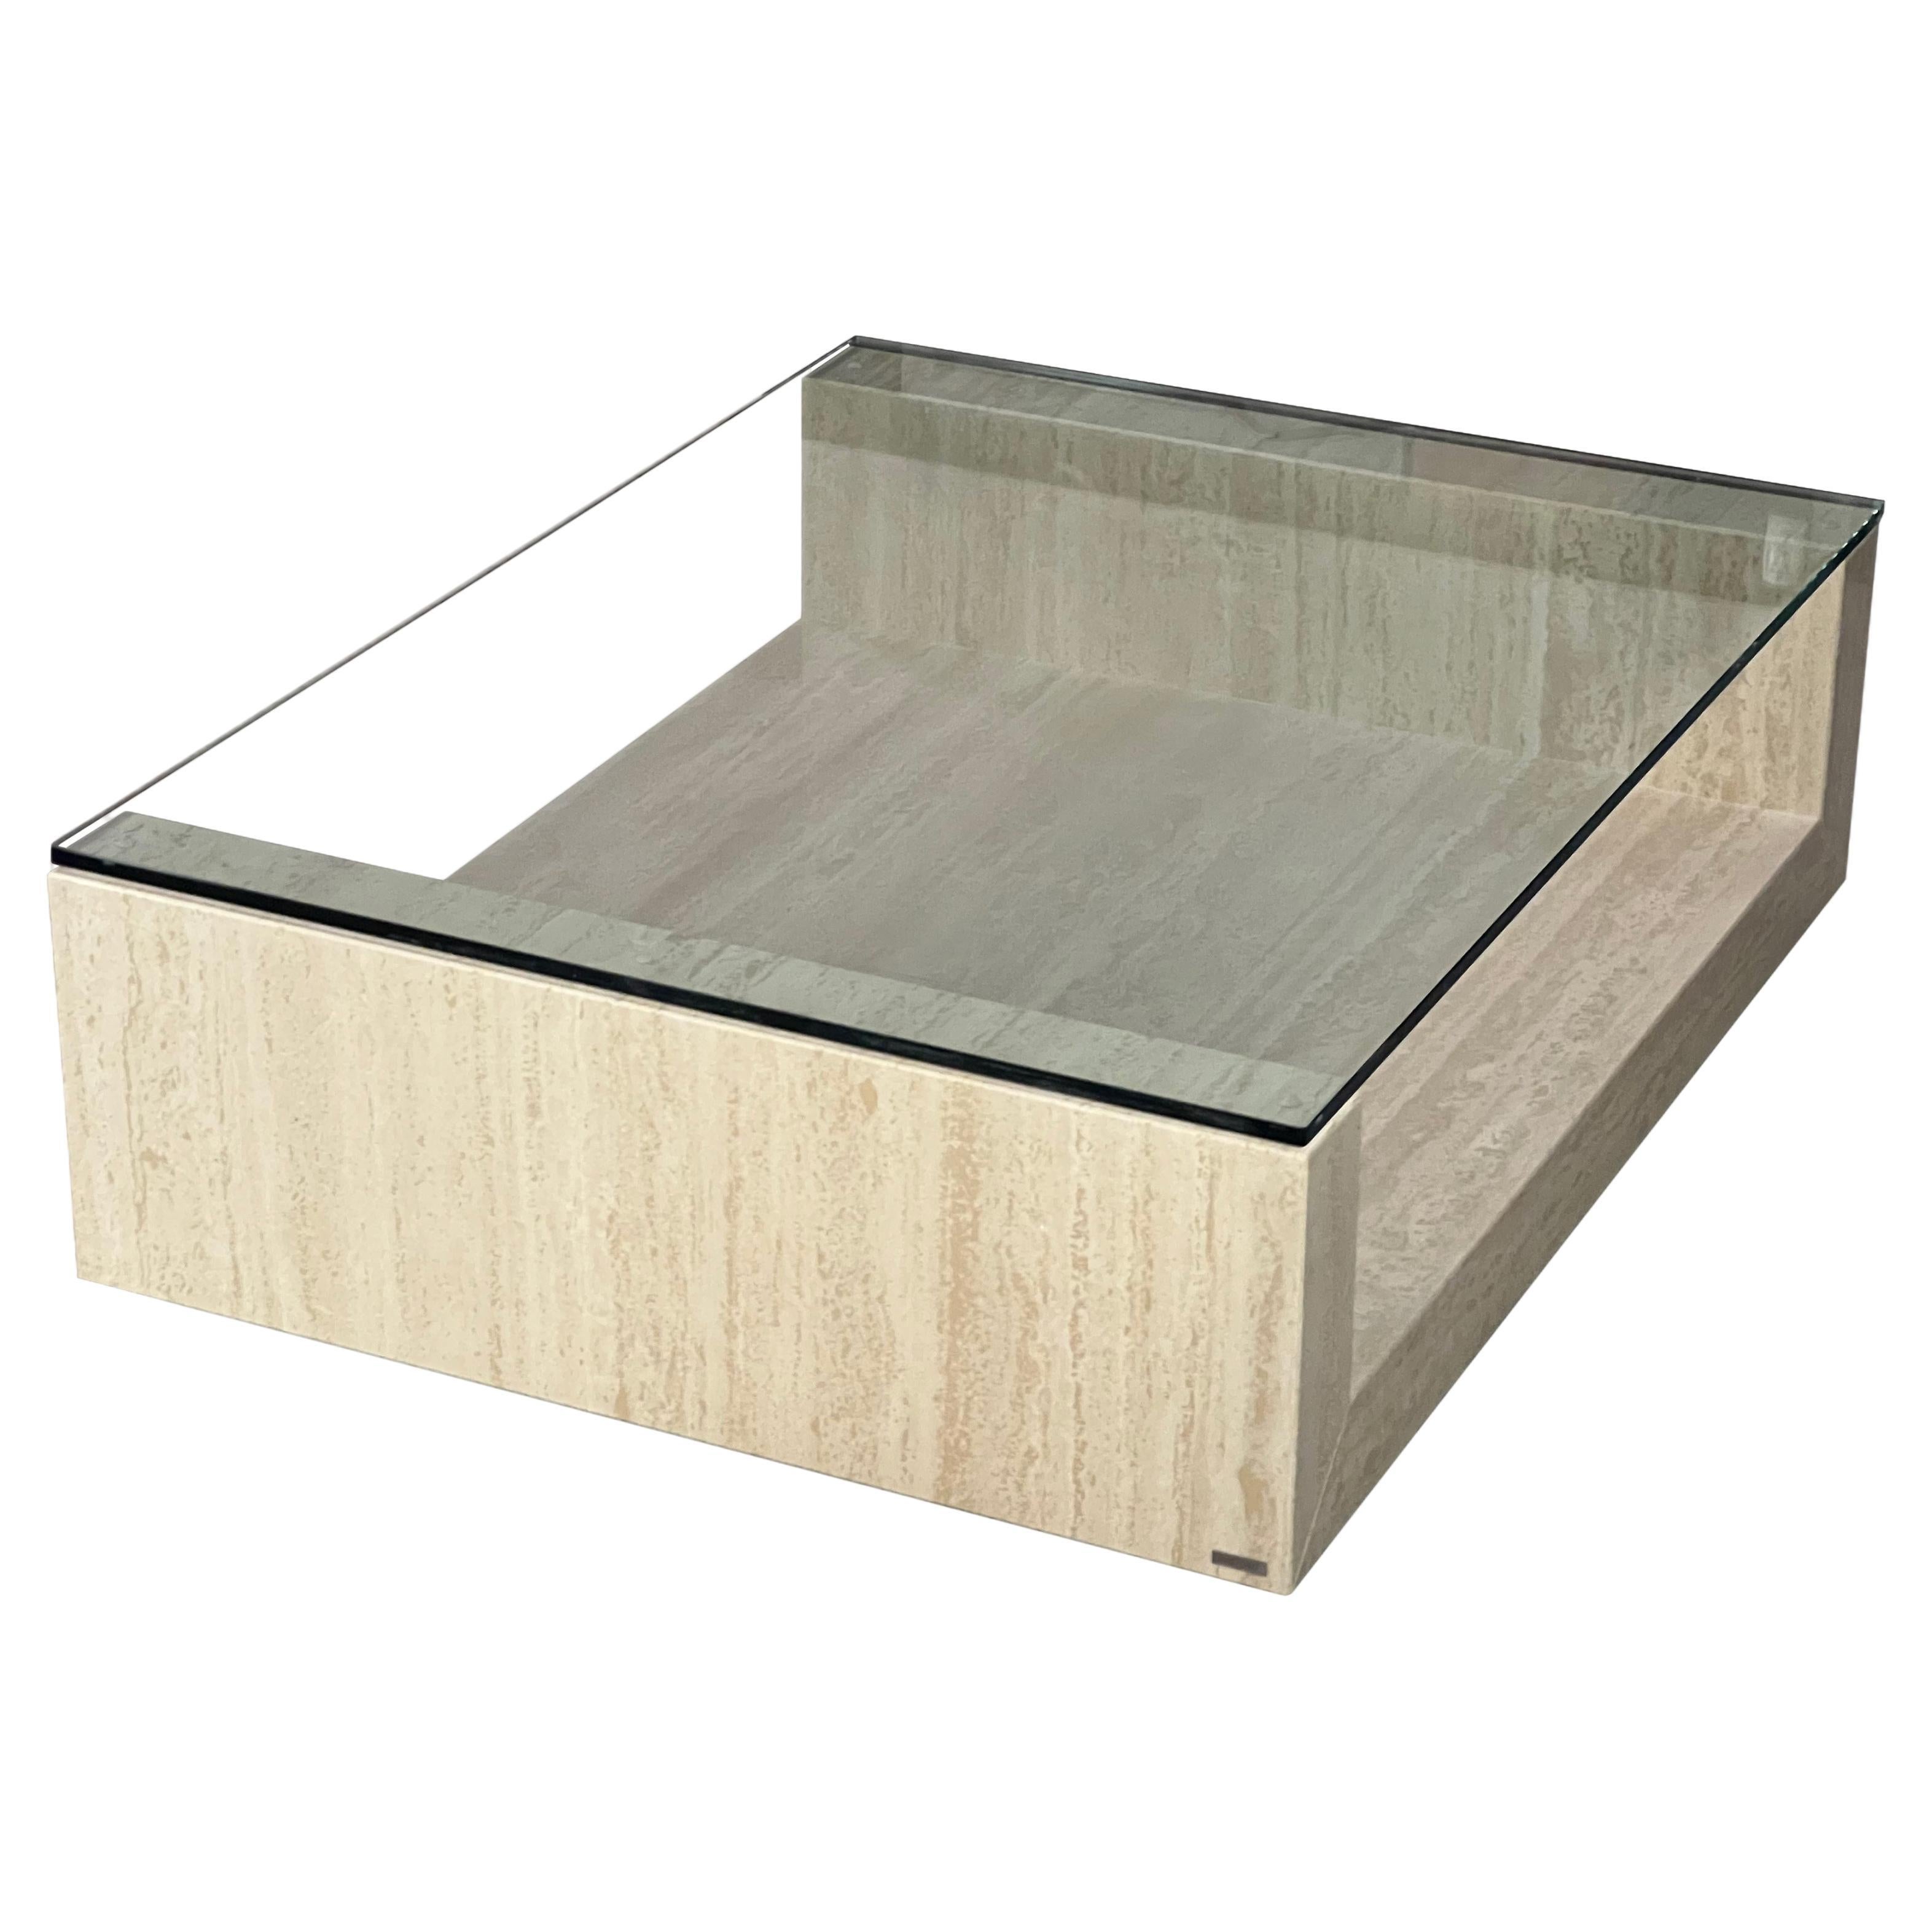 Travertine Marble AMIA Table Contemporary Design Made in Spain Meddel in Stock